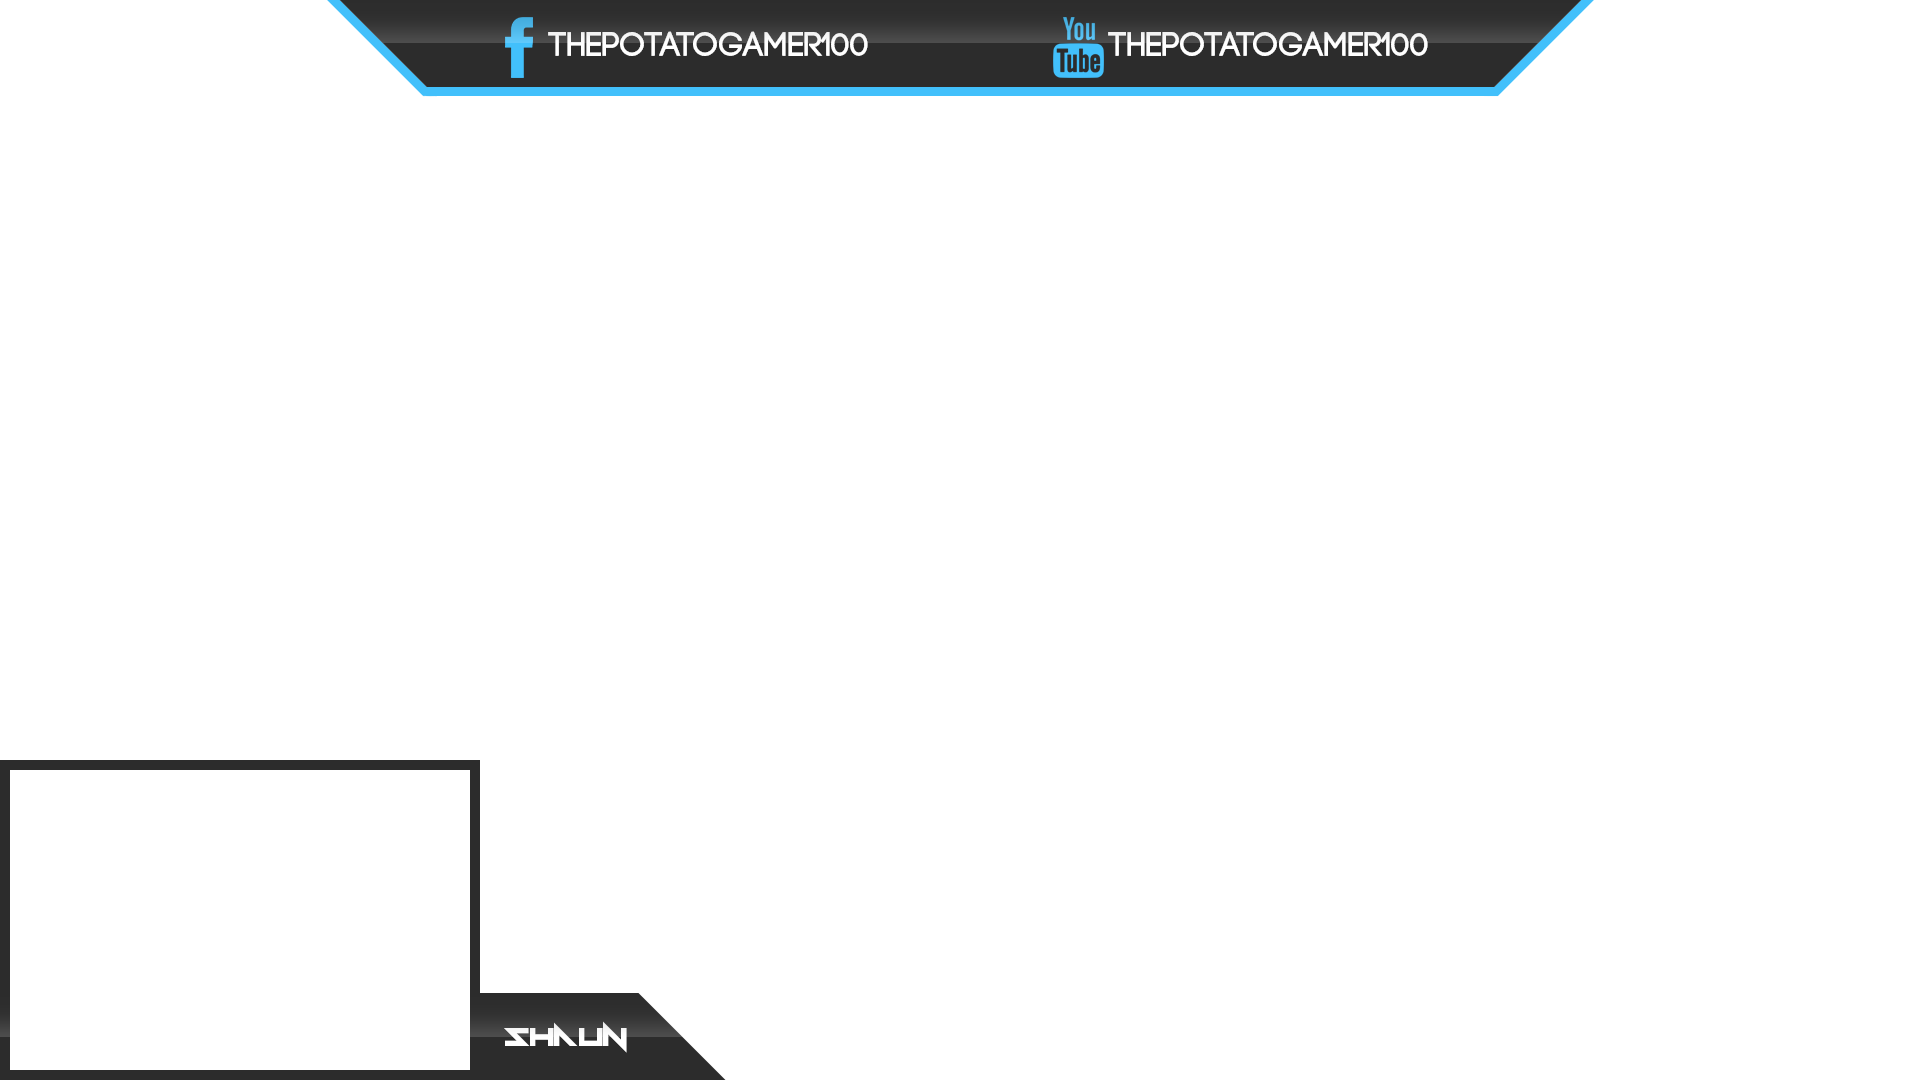 ThePotatogamer100 - Streaming overlay for Warframe by ... - 1920 x 1080 png 8105kB